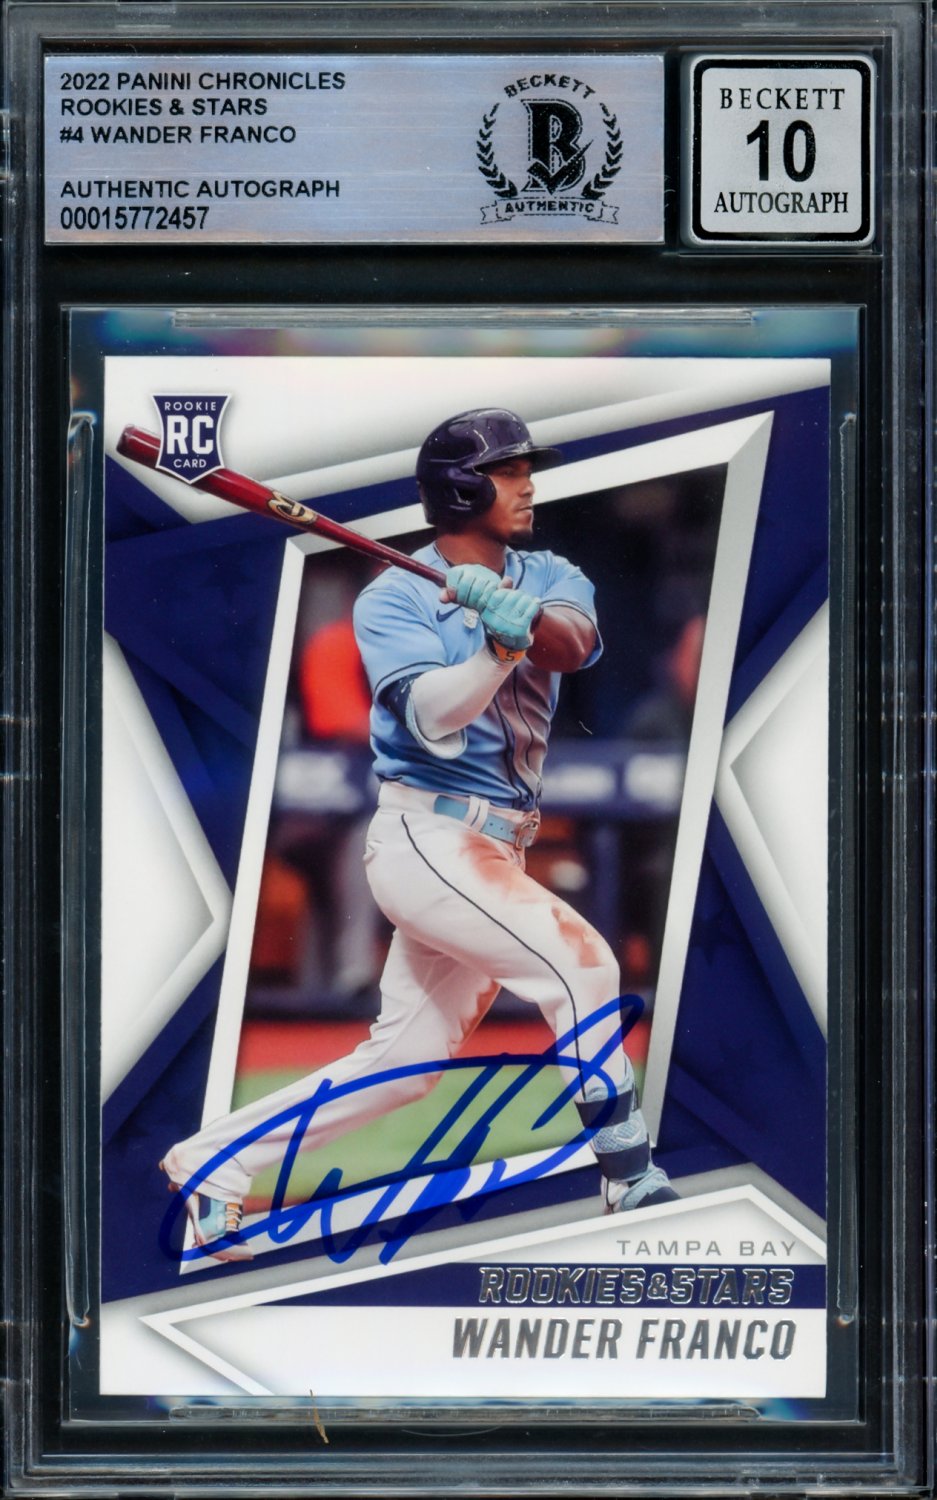 Wander Franco Autographed Signed 2022 Panini Chronicles Rookies & Stars  Rookie Card #4 Tampa Bay Rays Auto Grade Gem Mint 10 Beckett Beckett